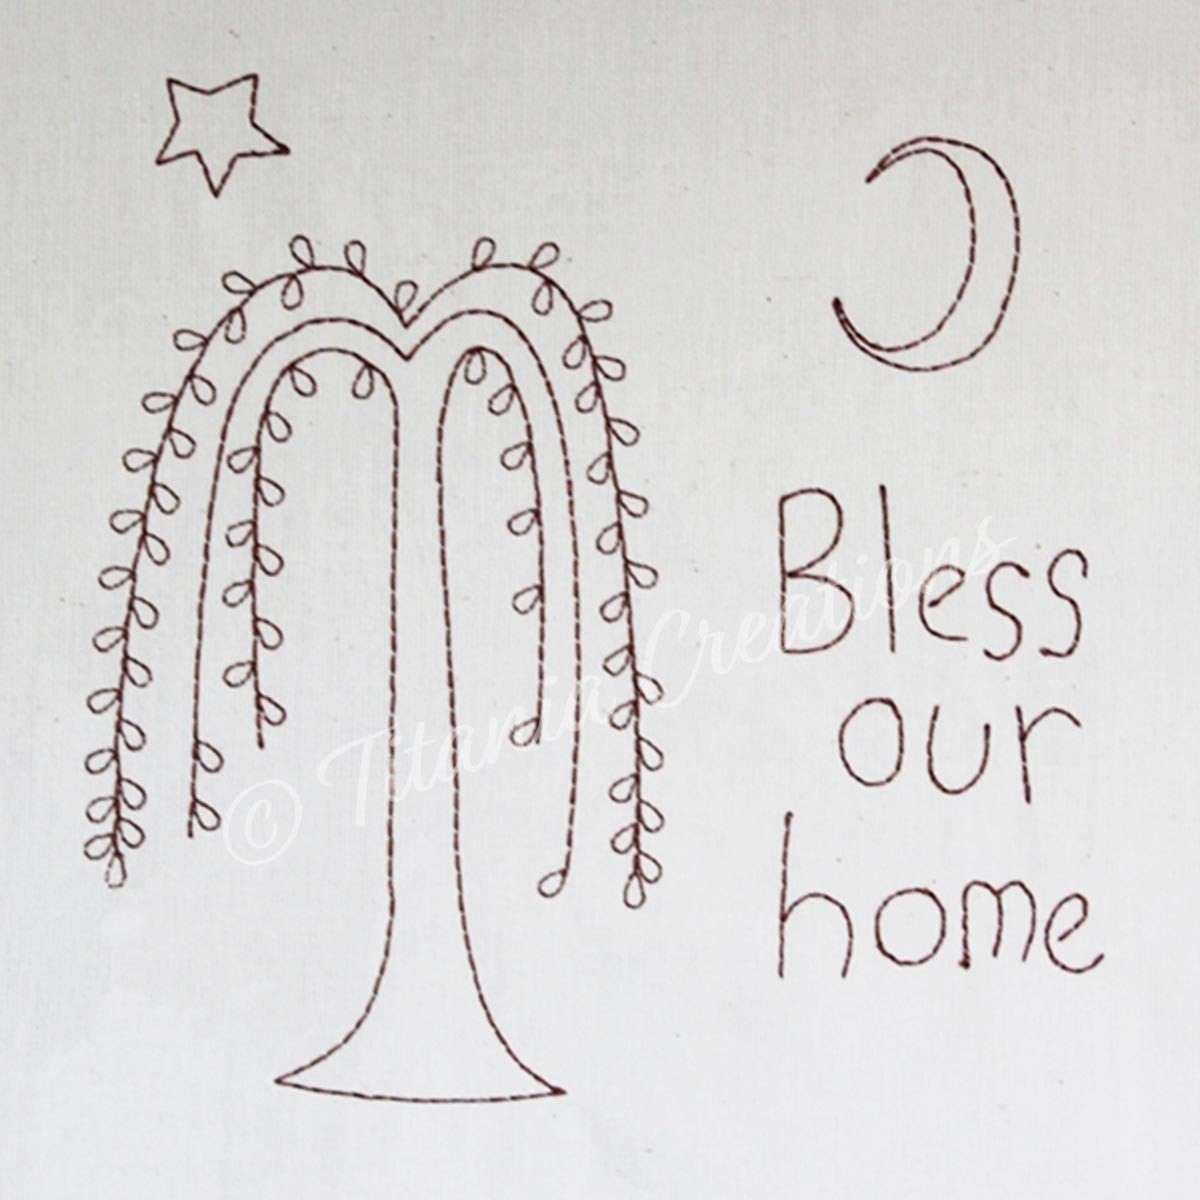 Bless Our Home Red Work Sampler 7x7 8x8